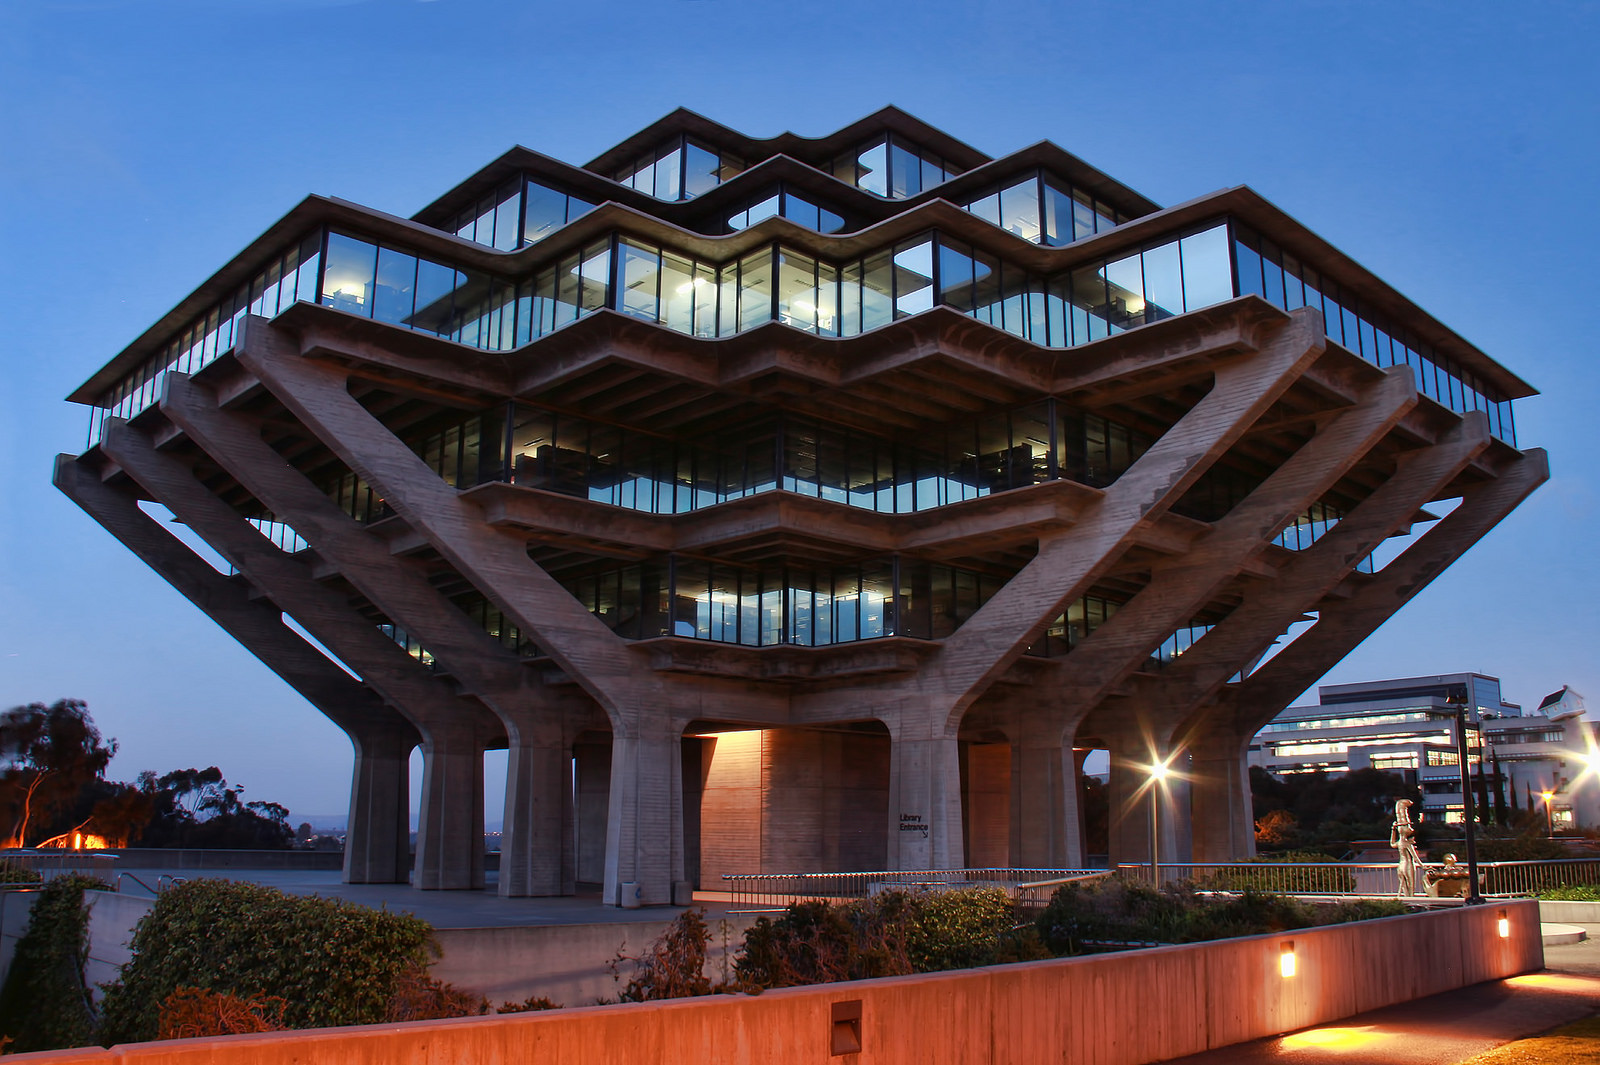 Night View of The Geisel Library, University of California San Diego